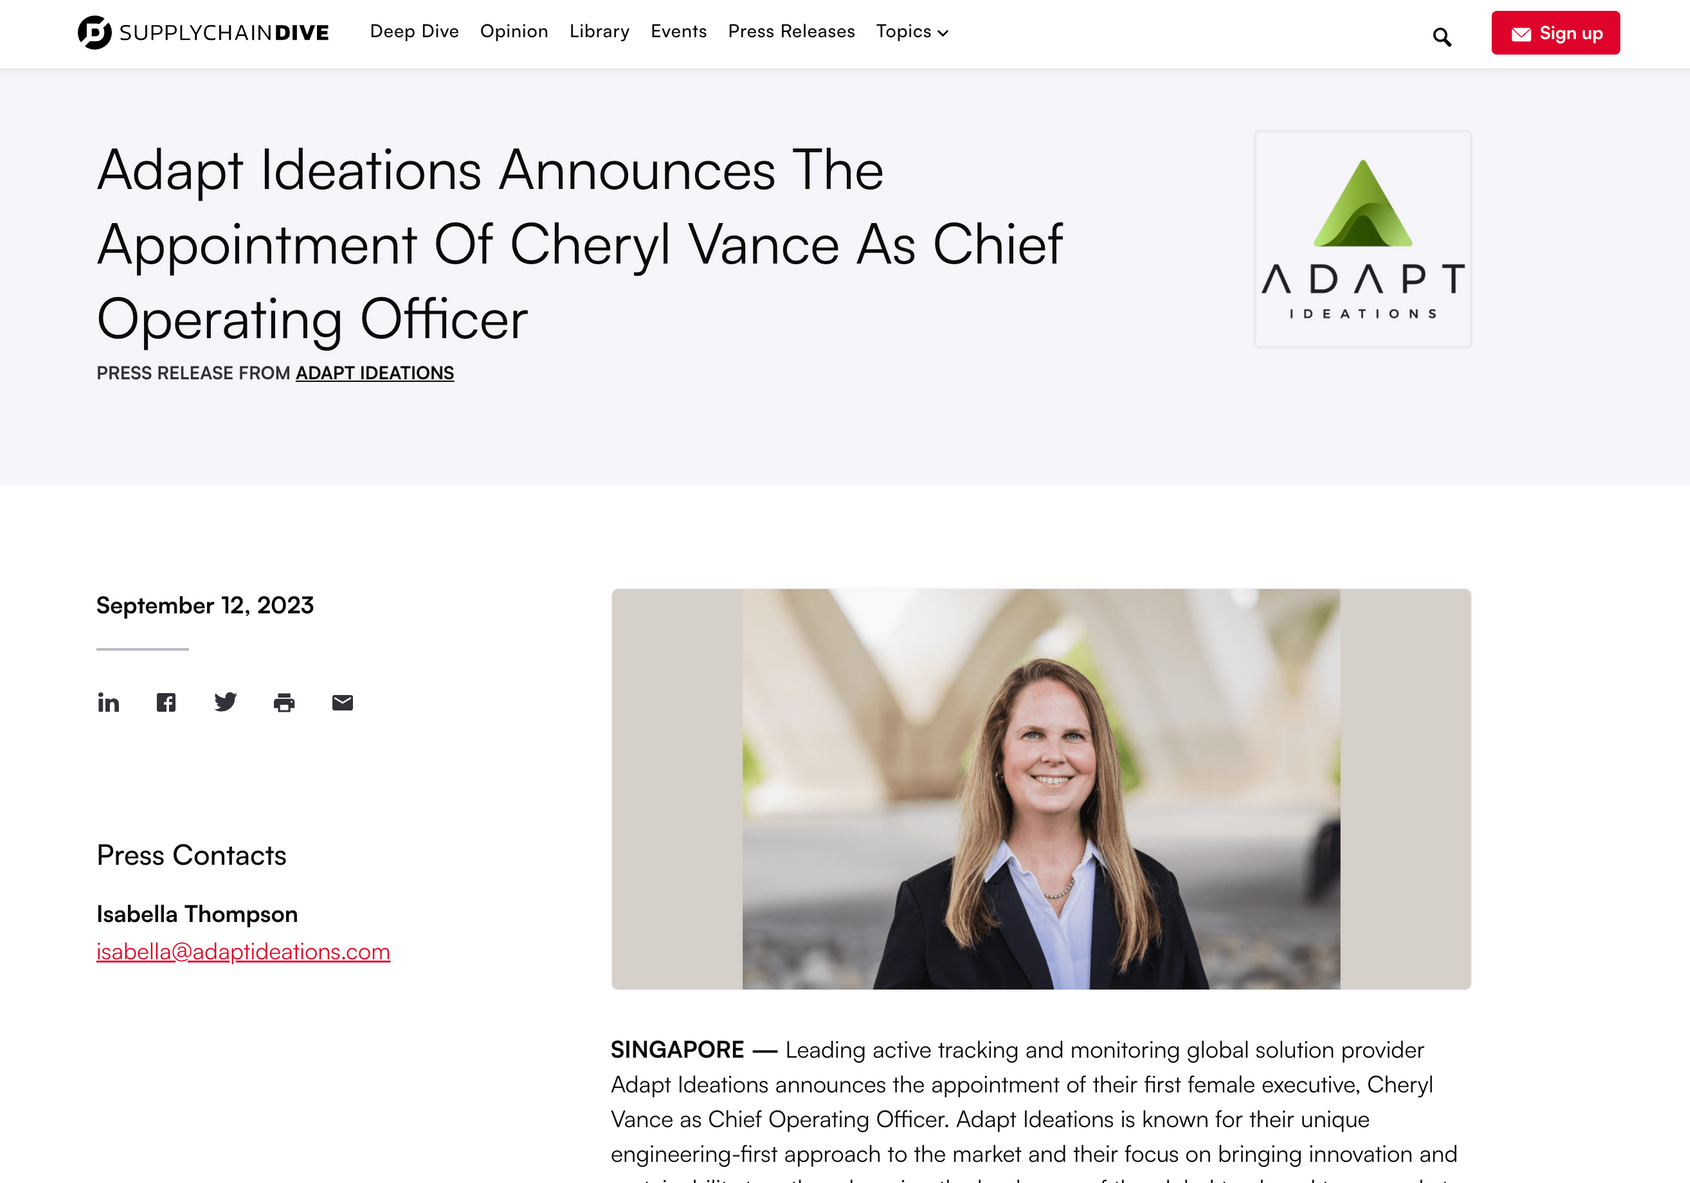 Adapt ideas announces the appointment of cheryl vance as chief operating officer.